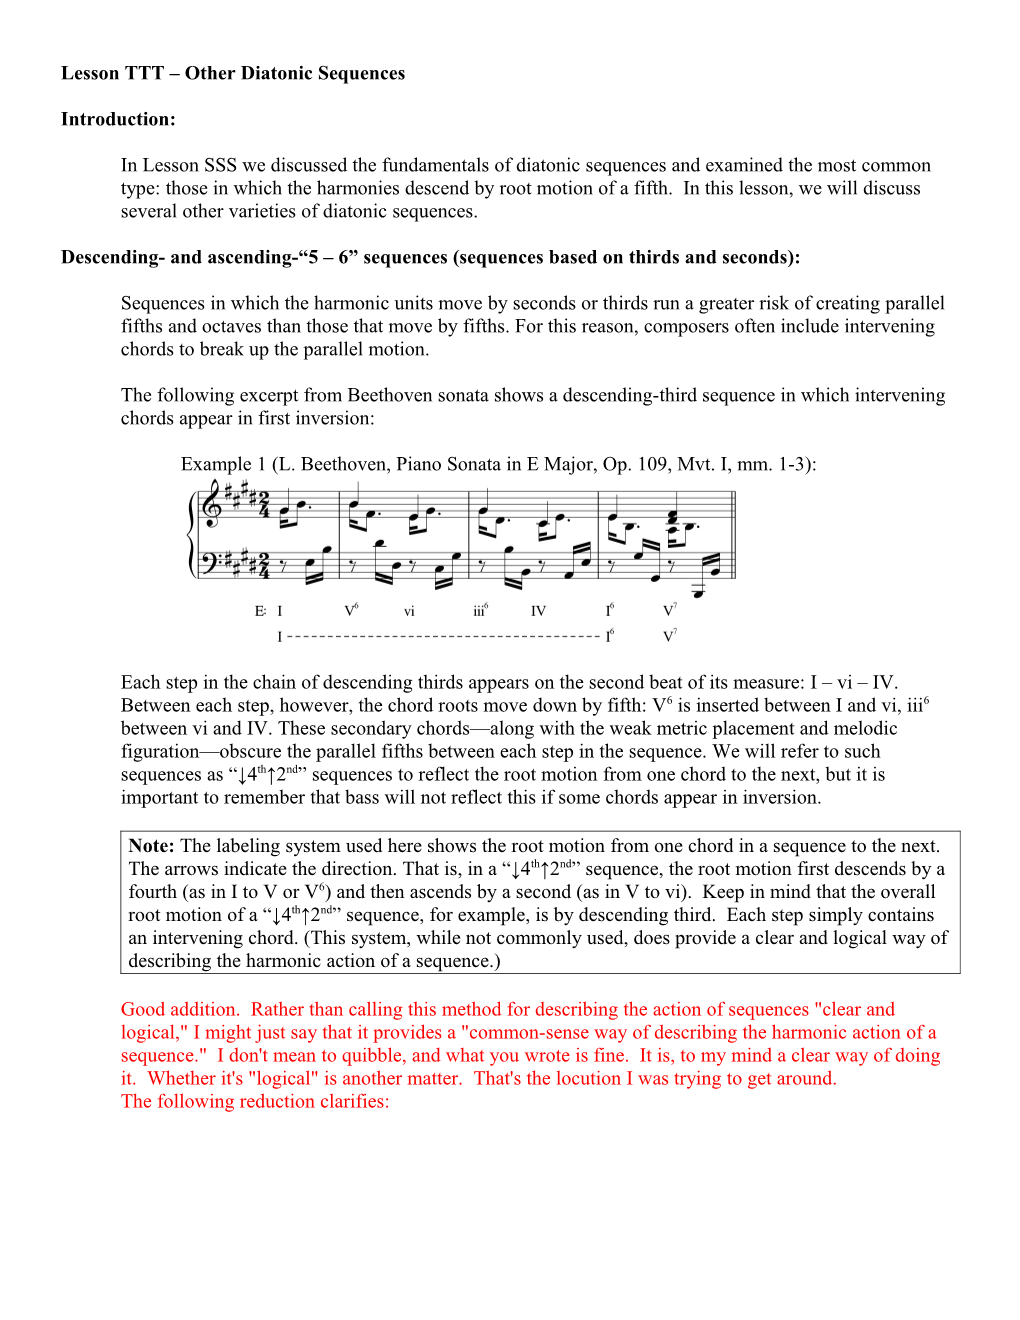 Lesson SSS: Diatonic Sequences